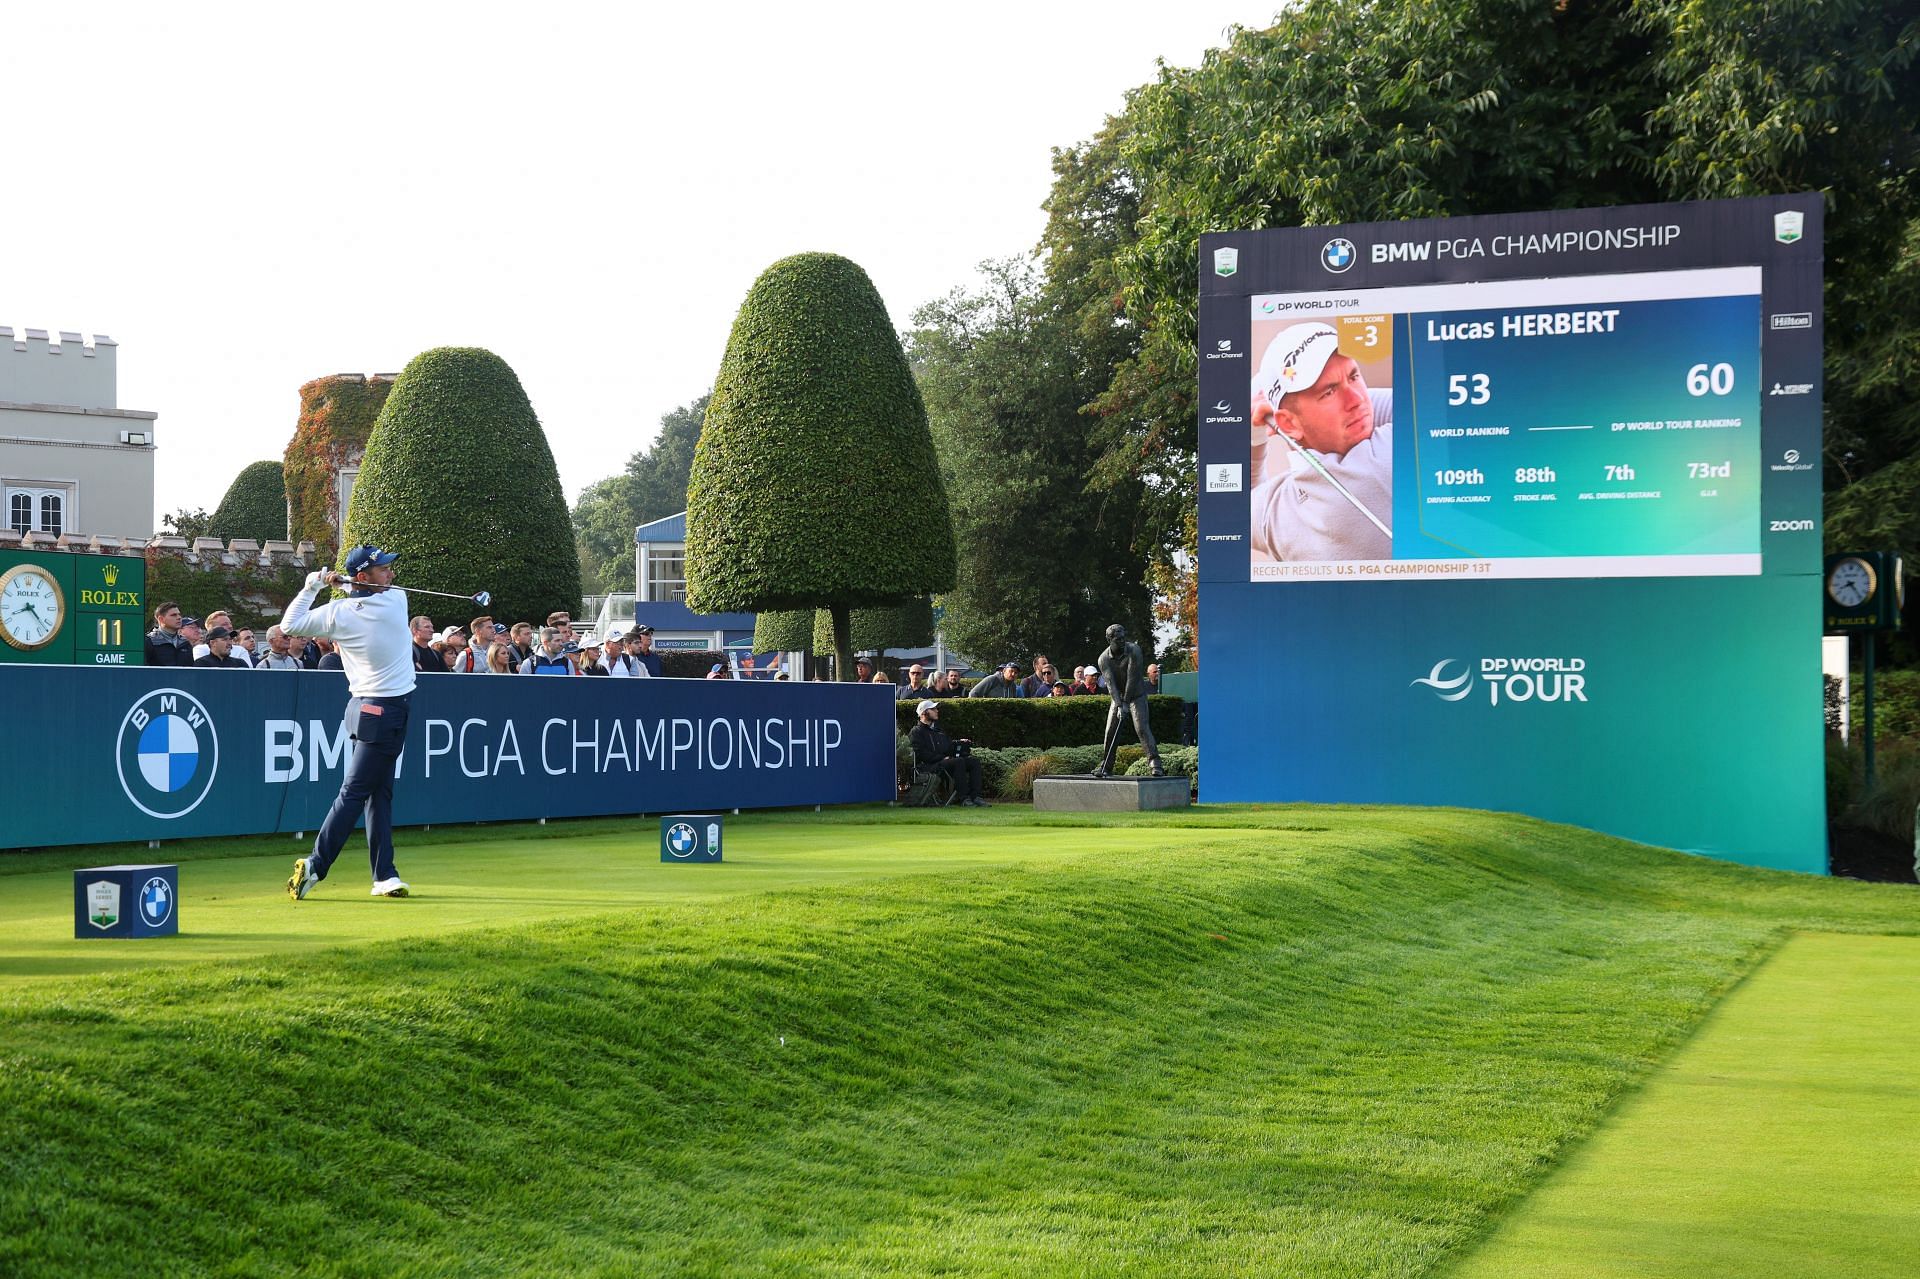 BMW PGA Championship resumed as a 54hole event